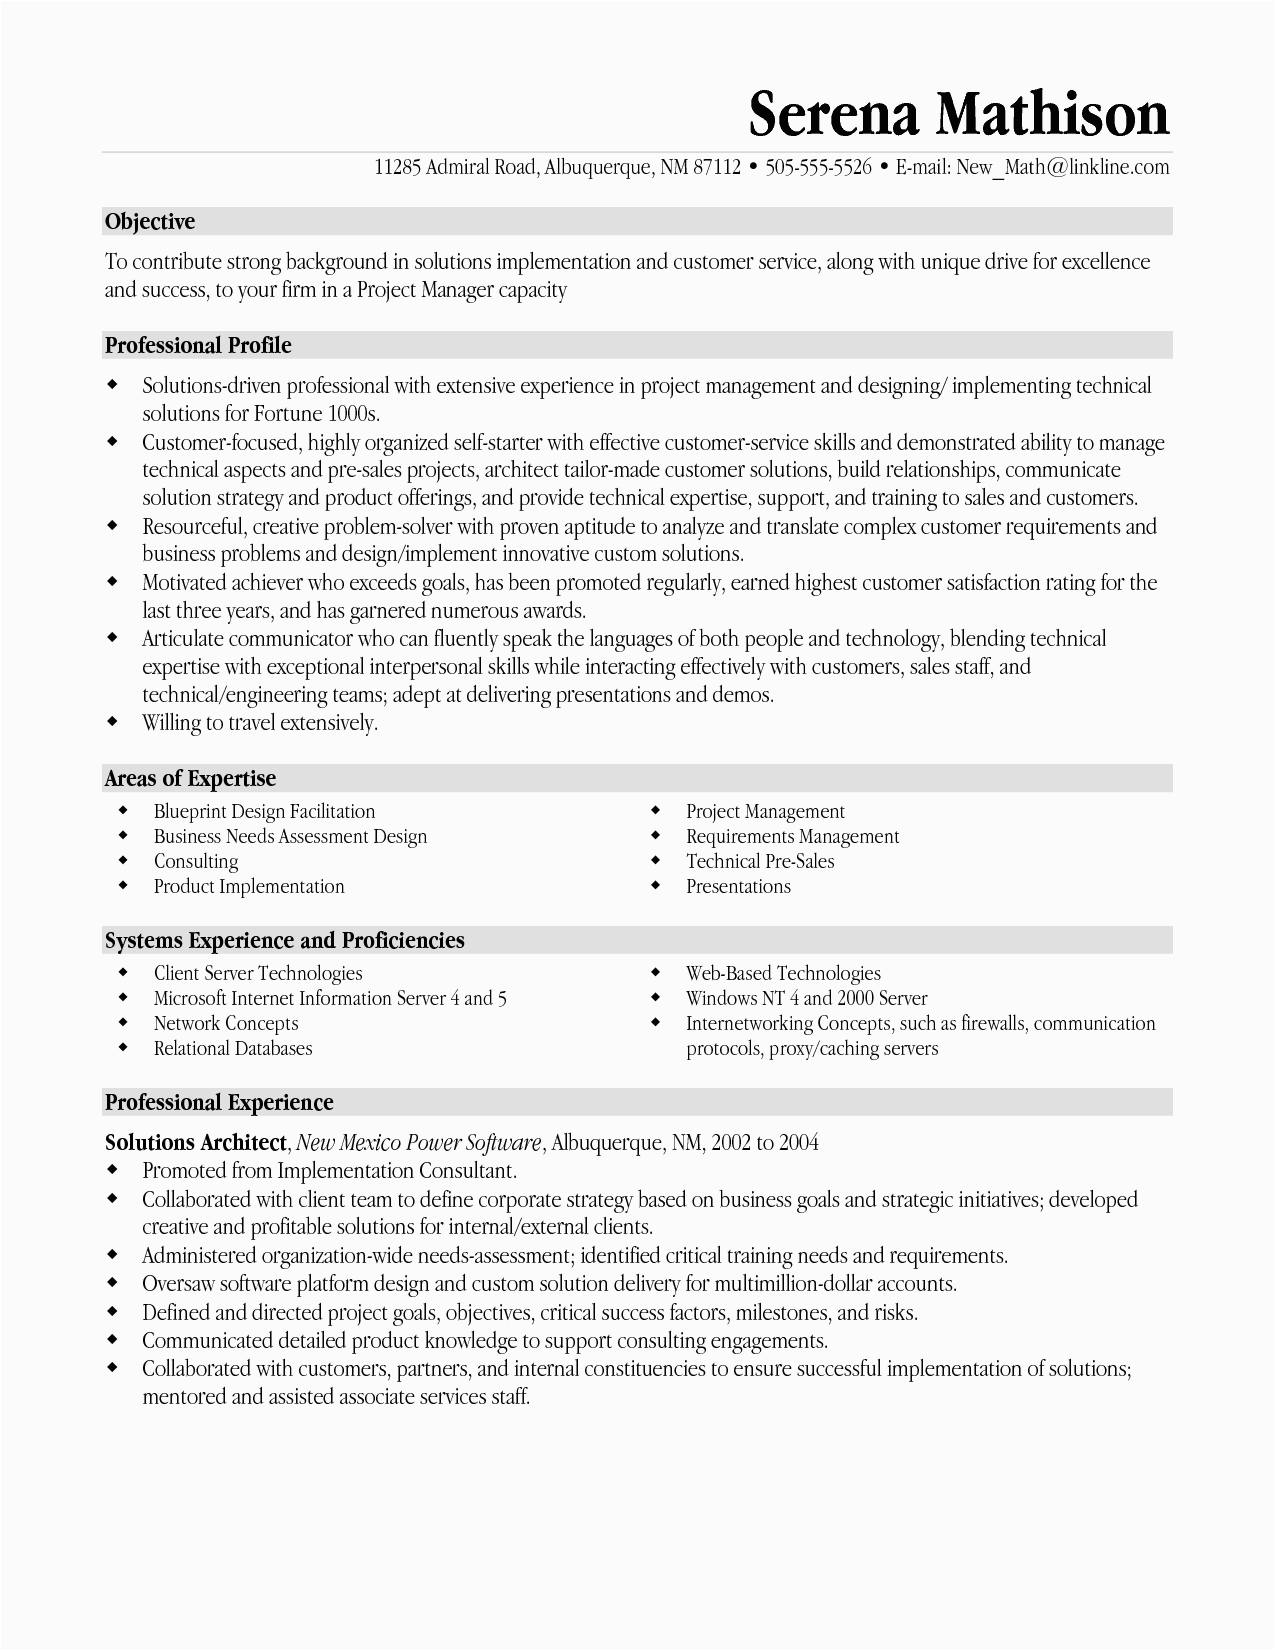 Sample Objectives for Resumes Project Management Project Management Resume